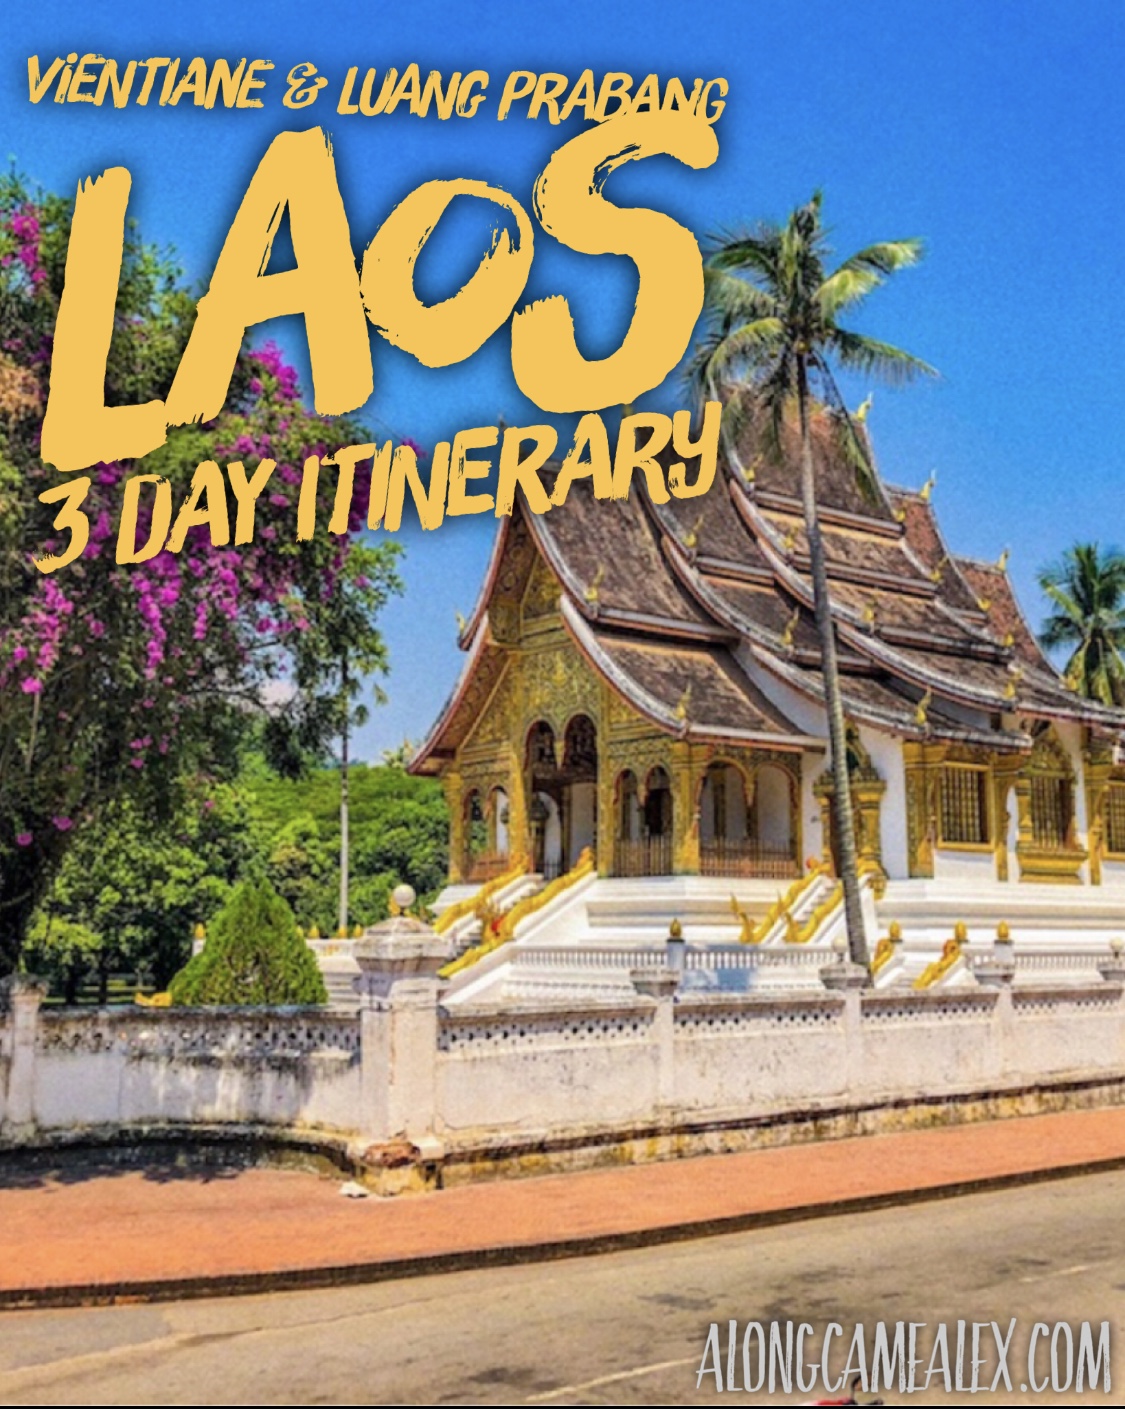 Stop what you’re doing and go to LAOS